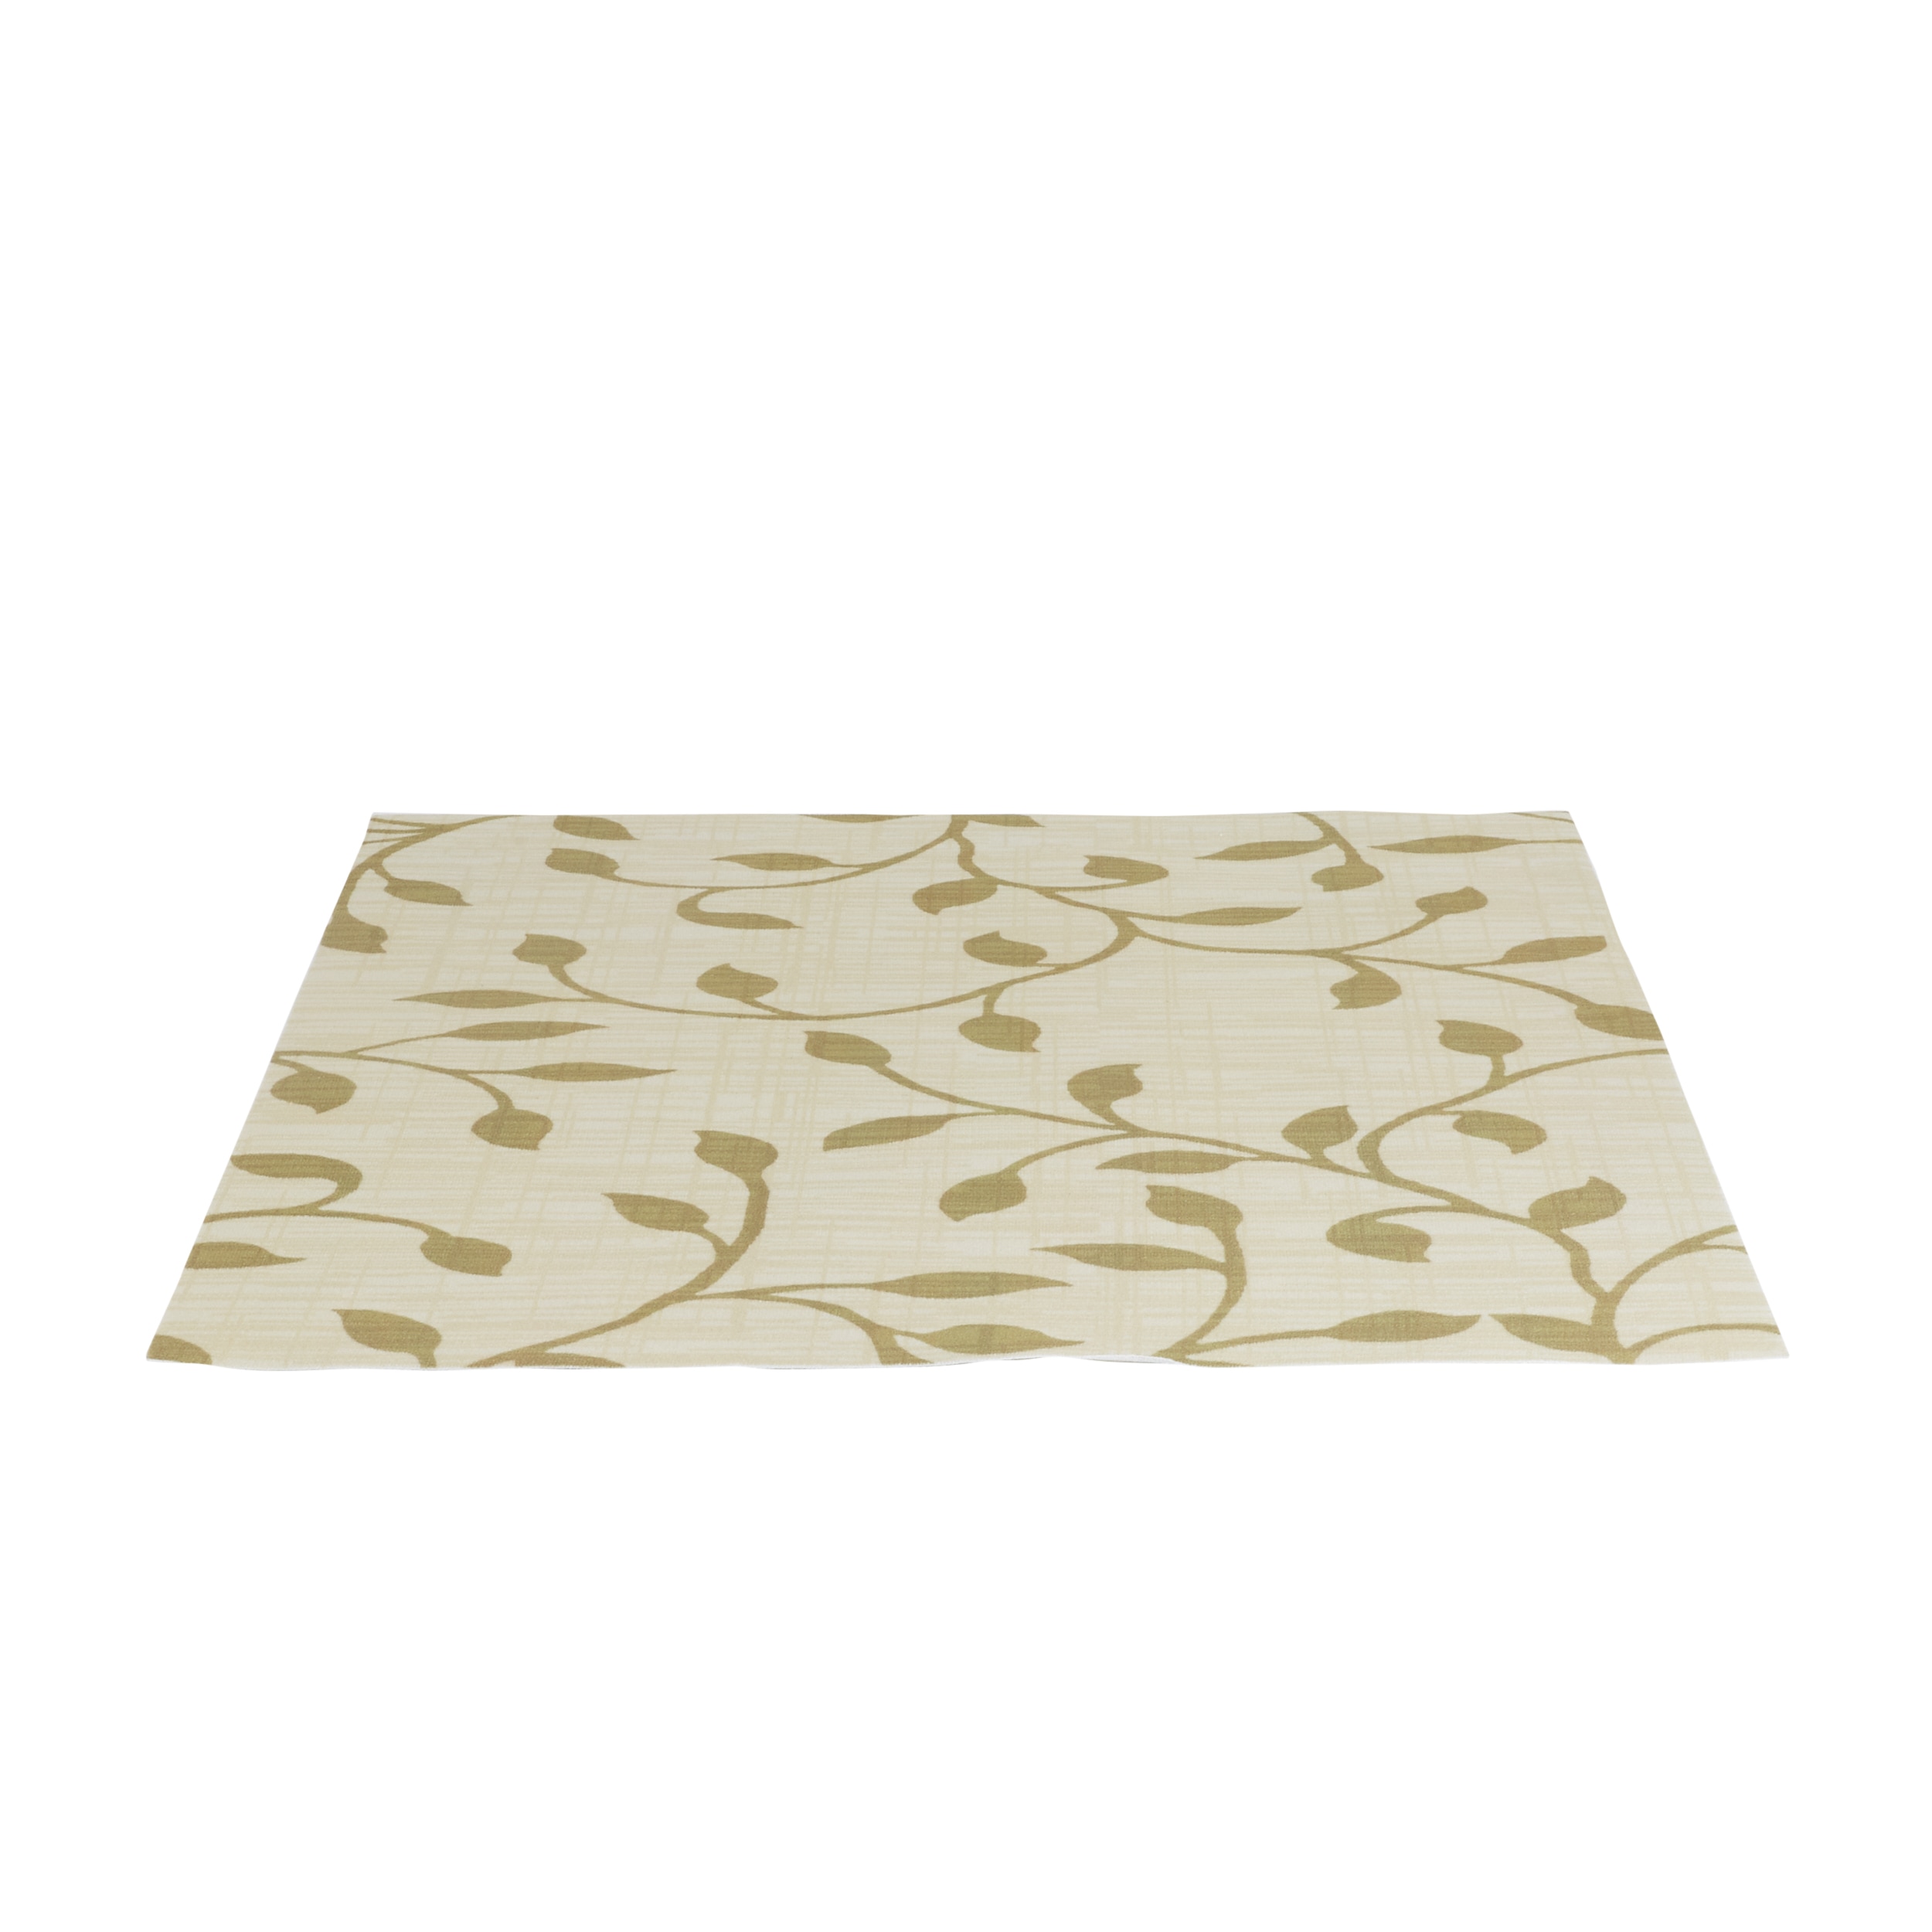 Area rug Home Decor at